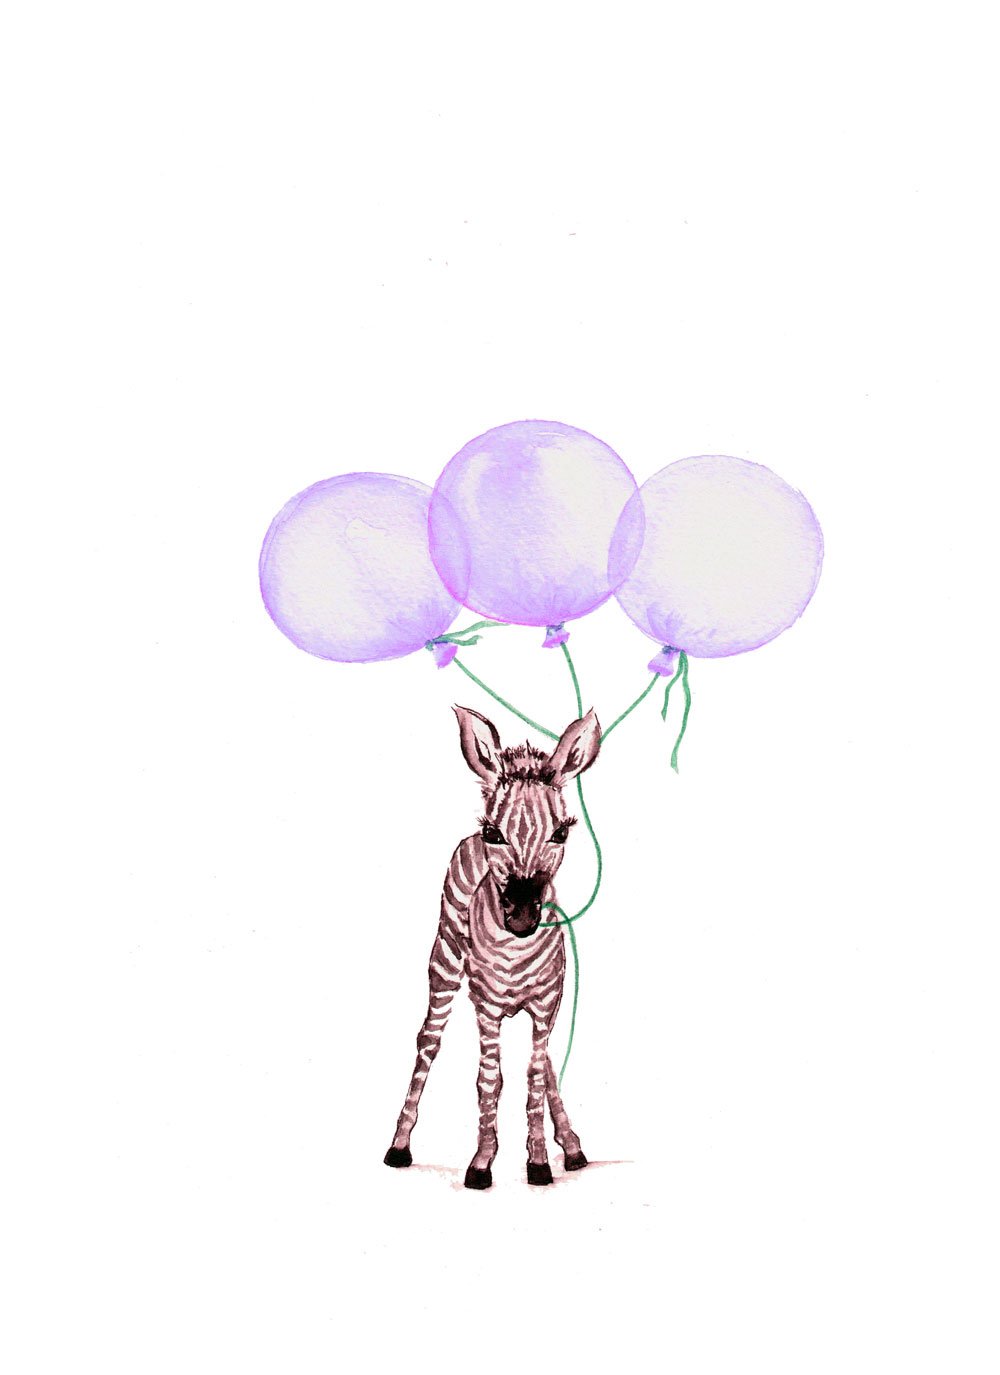 Image of Baby Zebra with Purple Balloons - From the CityLife Collection